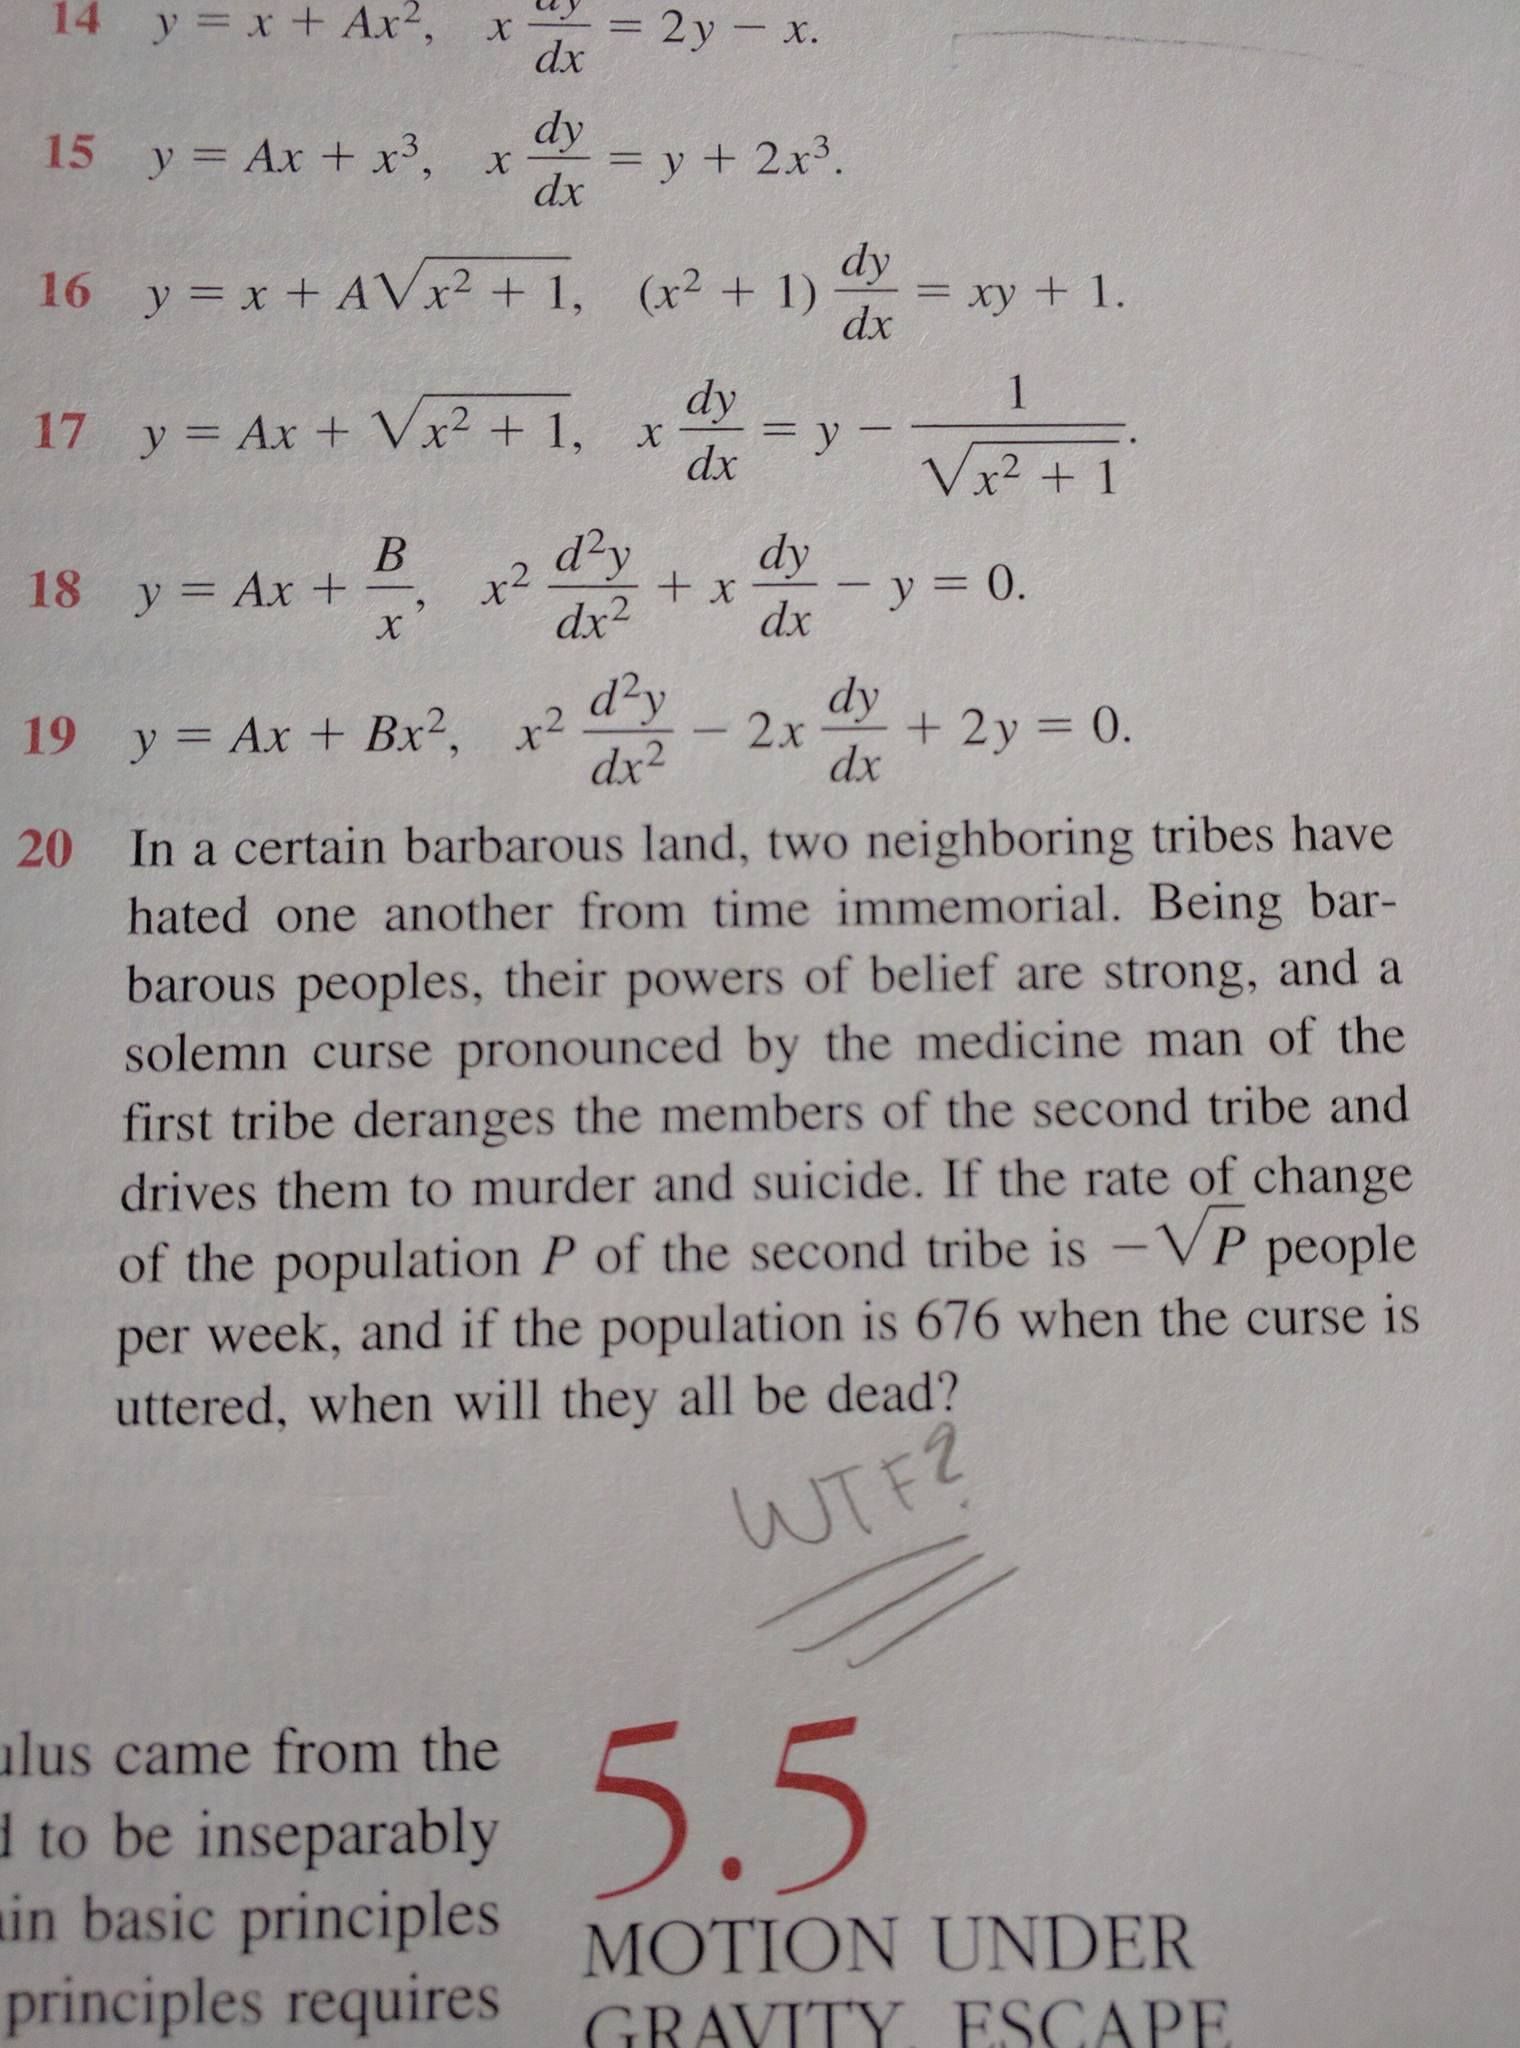 Question # 20 in my Math book